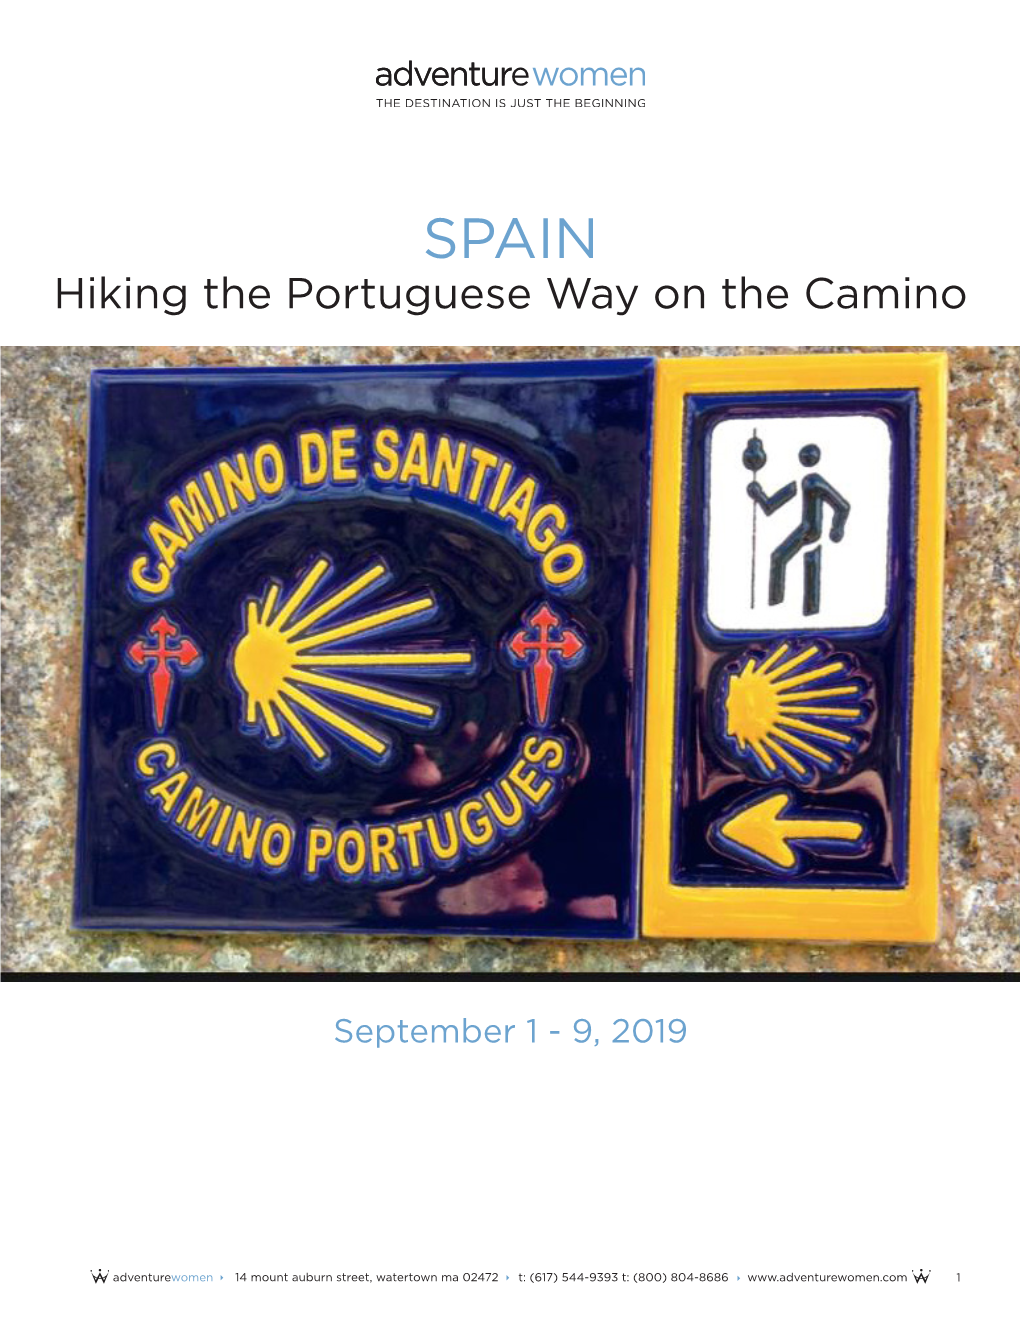 Hiking the Portuguese Way on the Camino